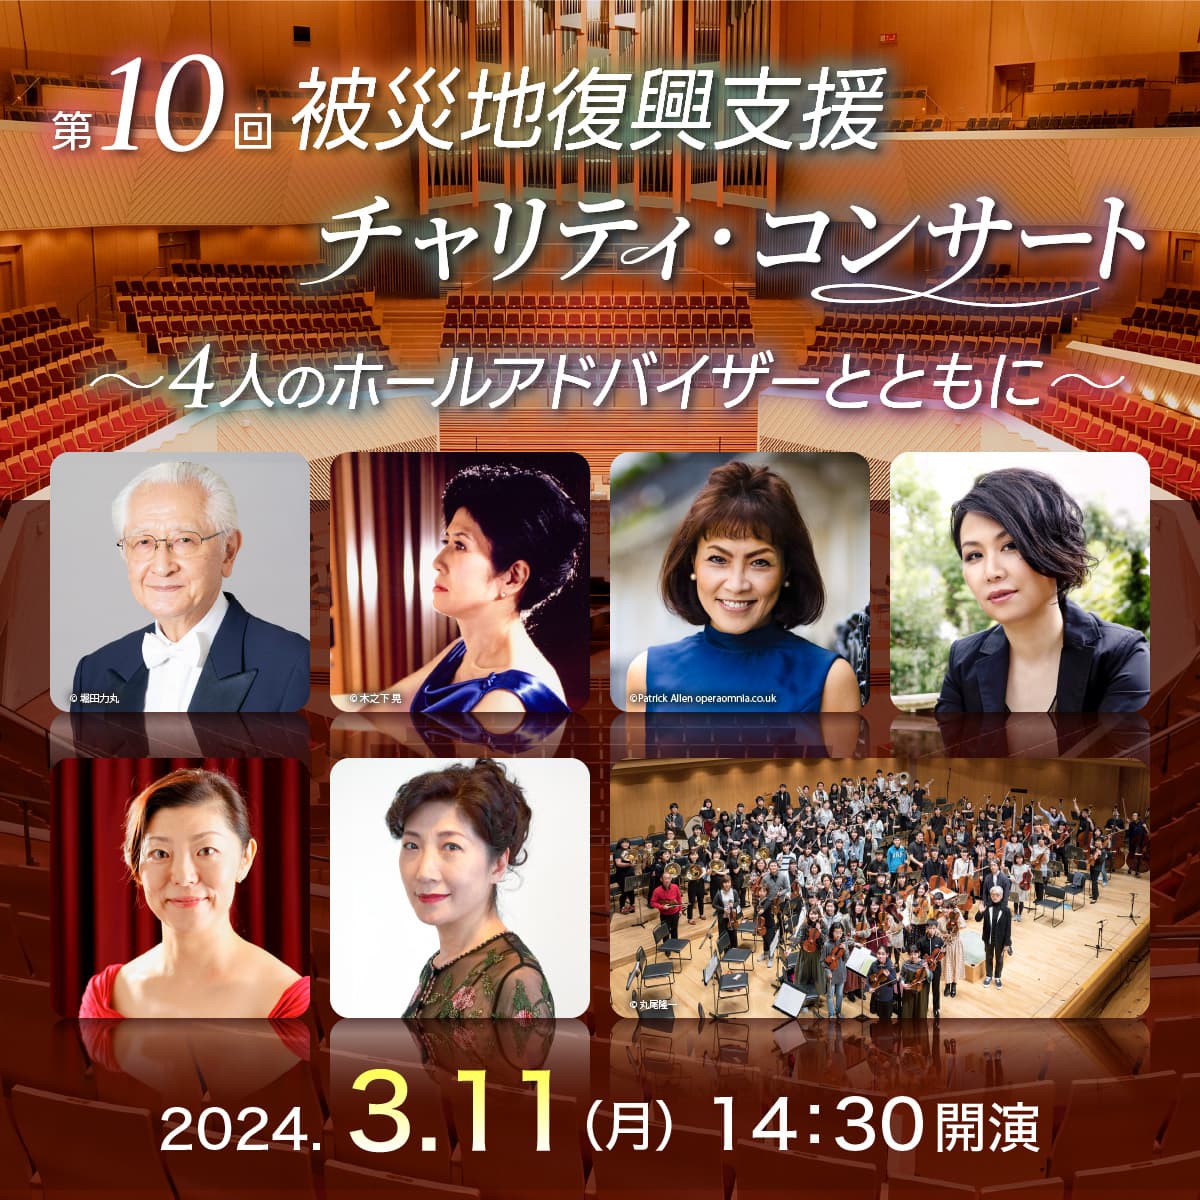 10th Charity Concert Date/Time Mon 11 Mar 2024 14:30